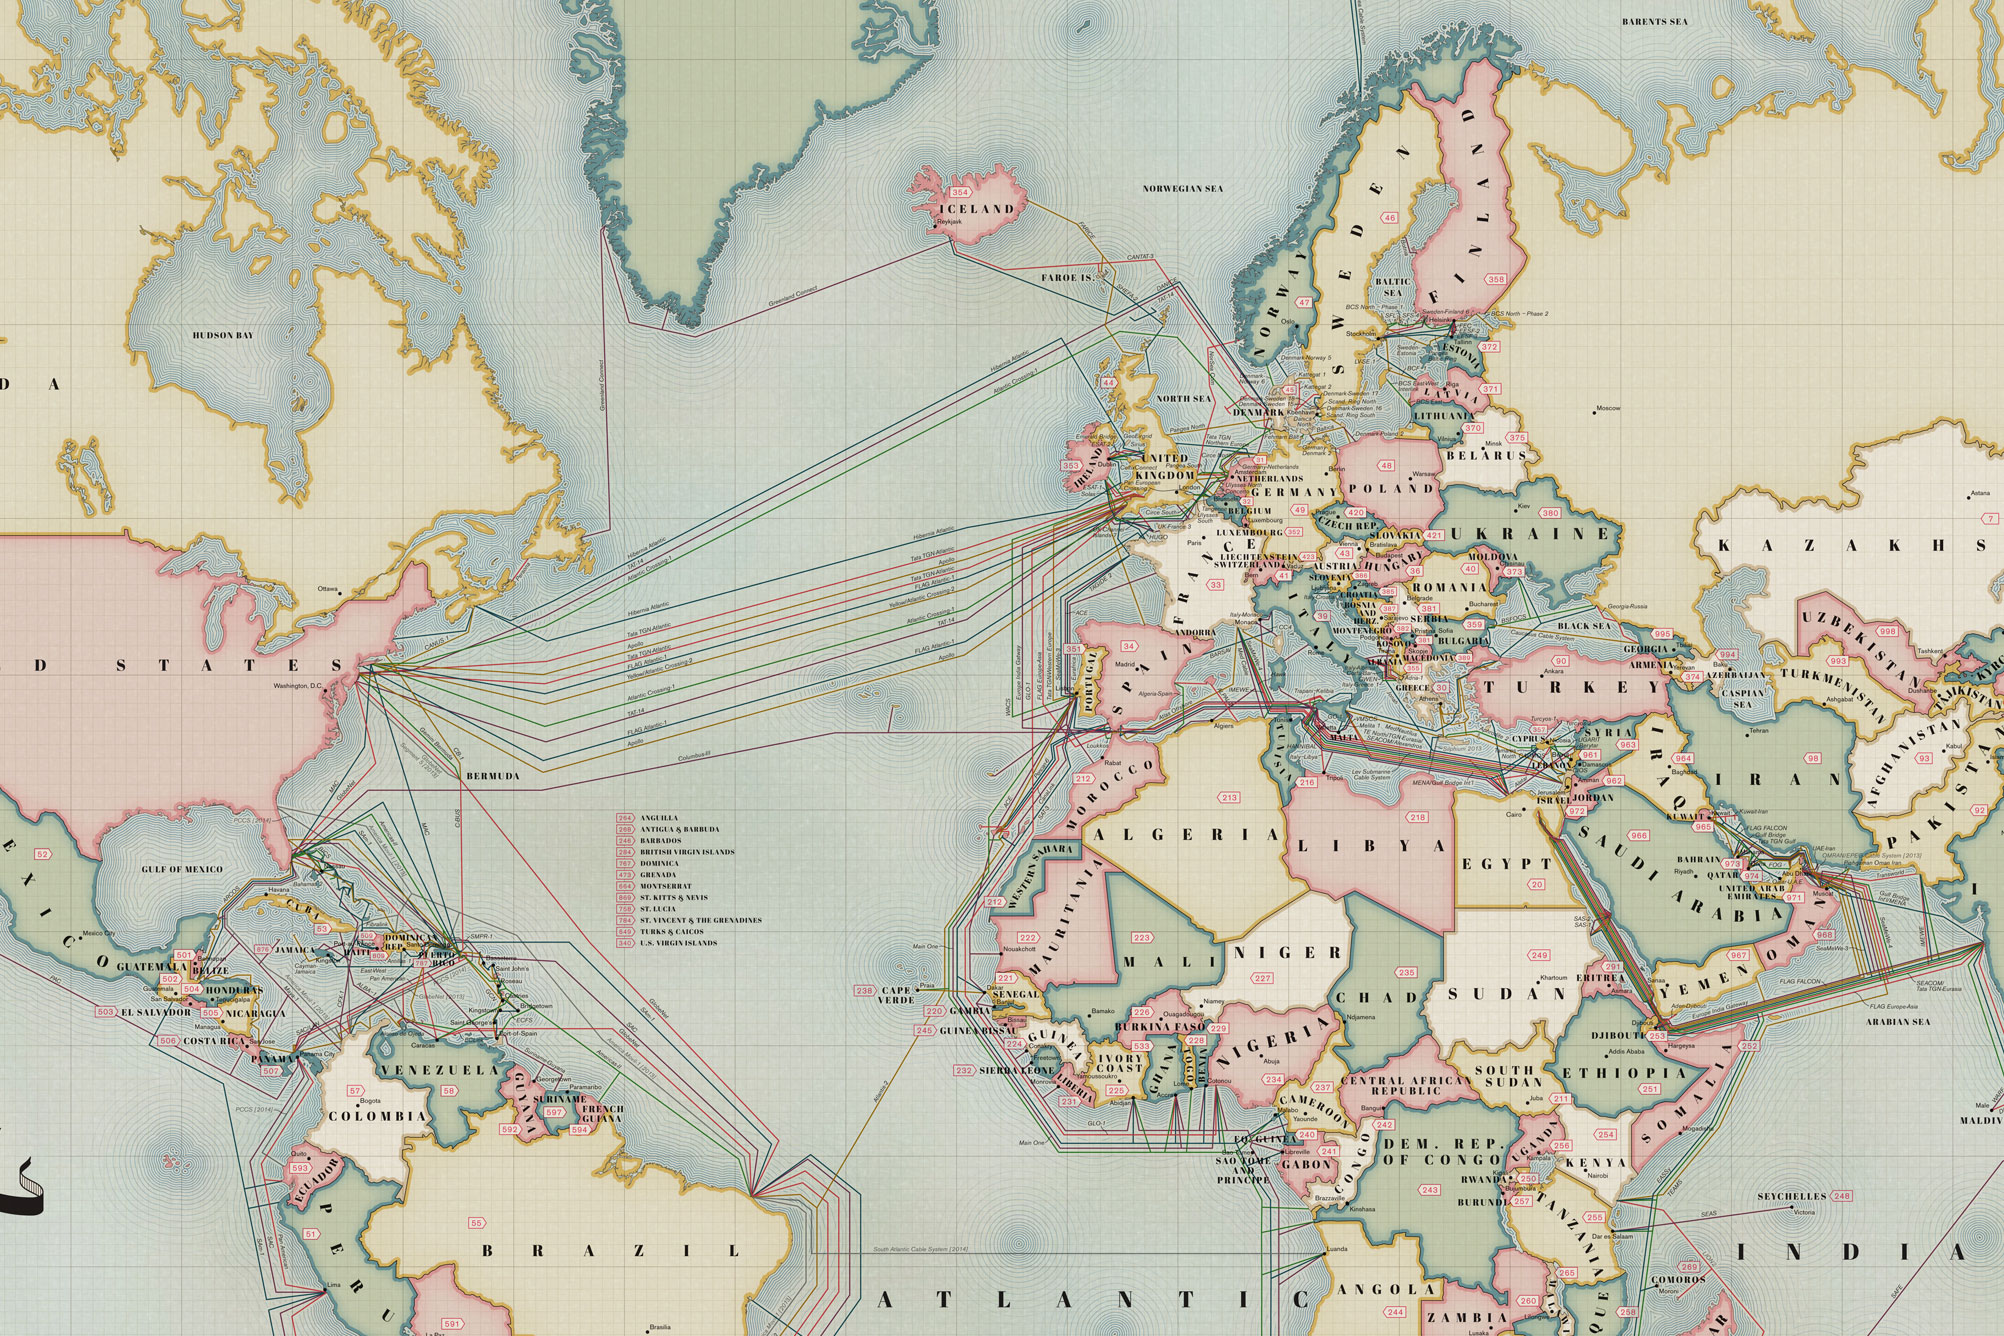 submarine-cable-map-2013-color.jpg